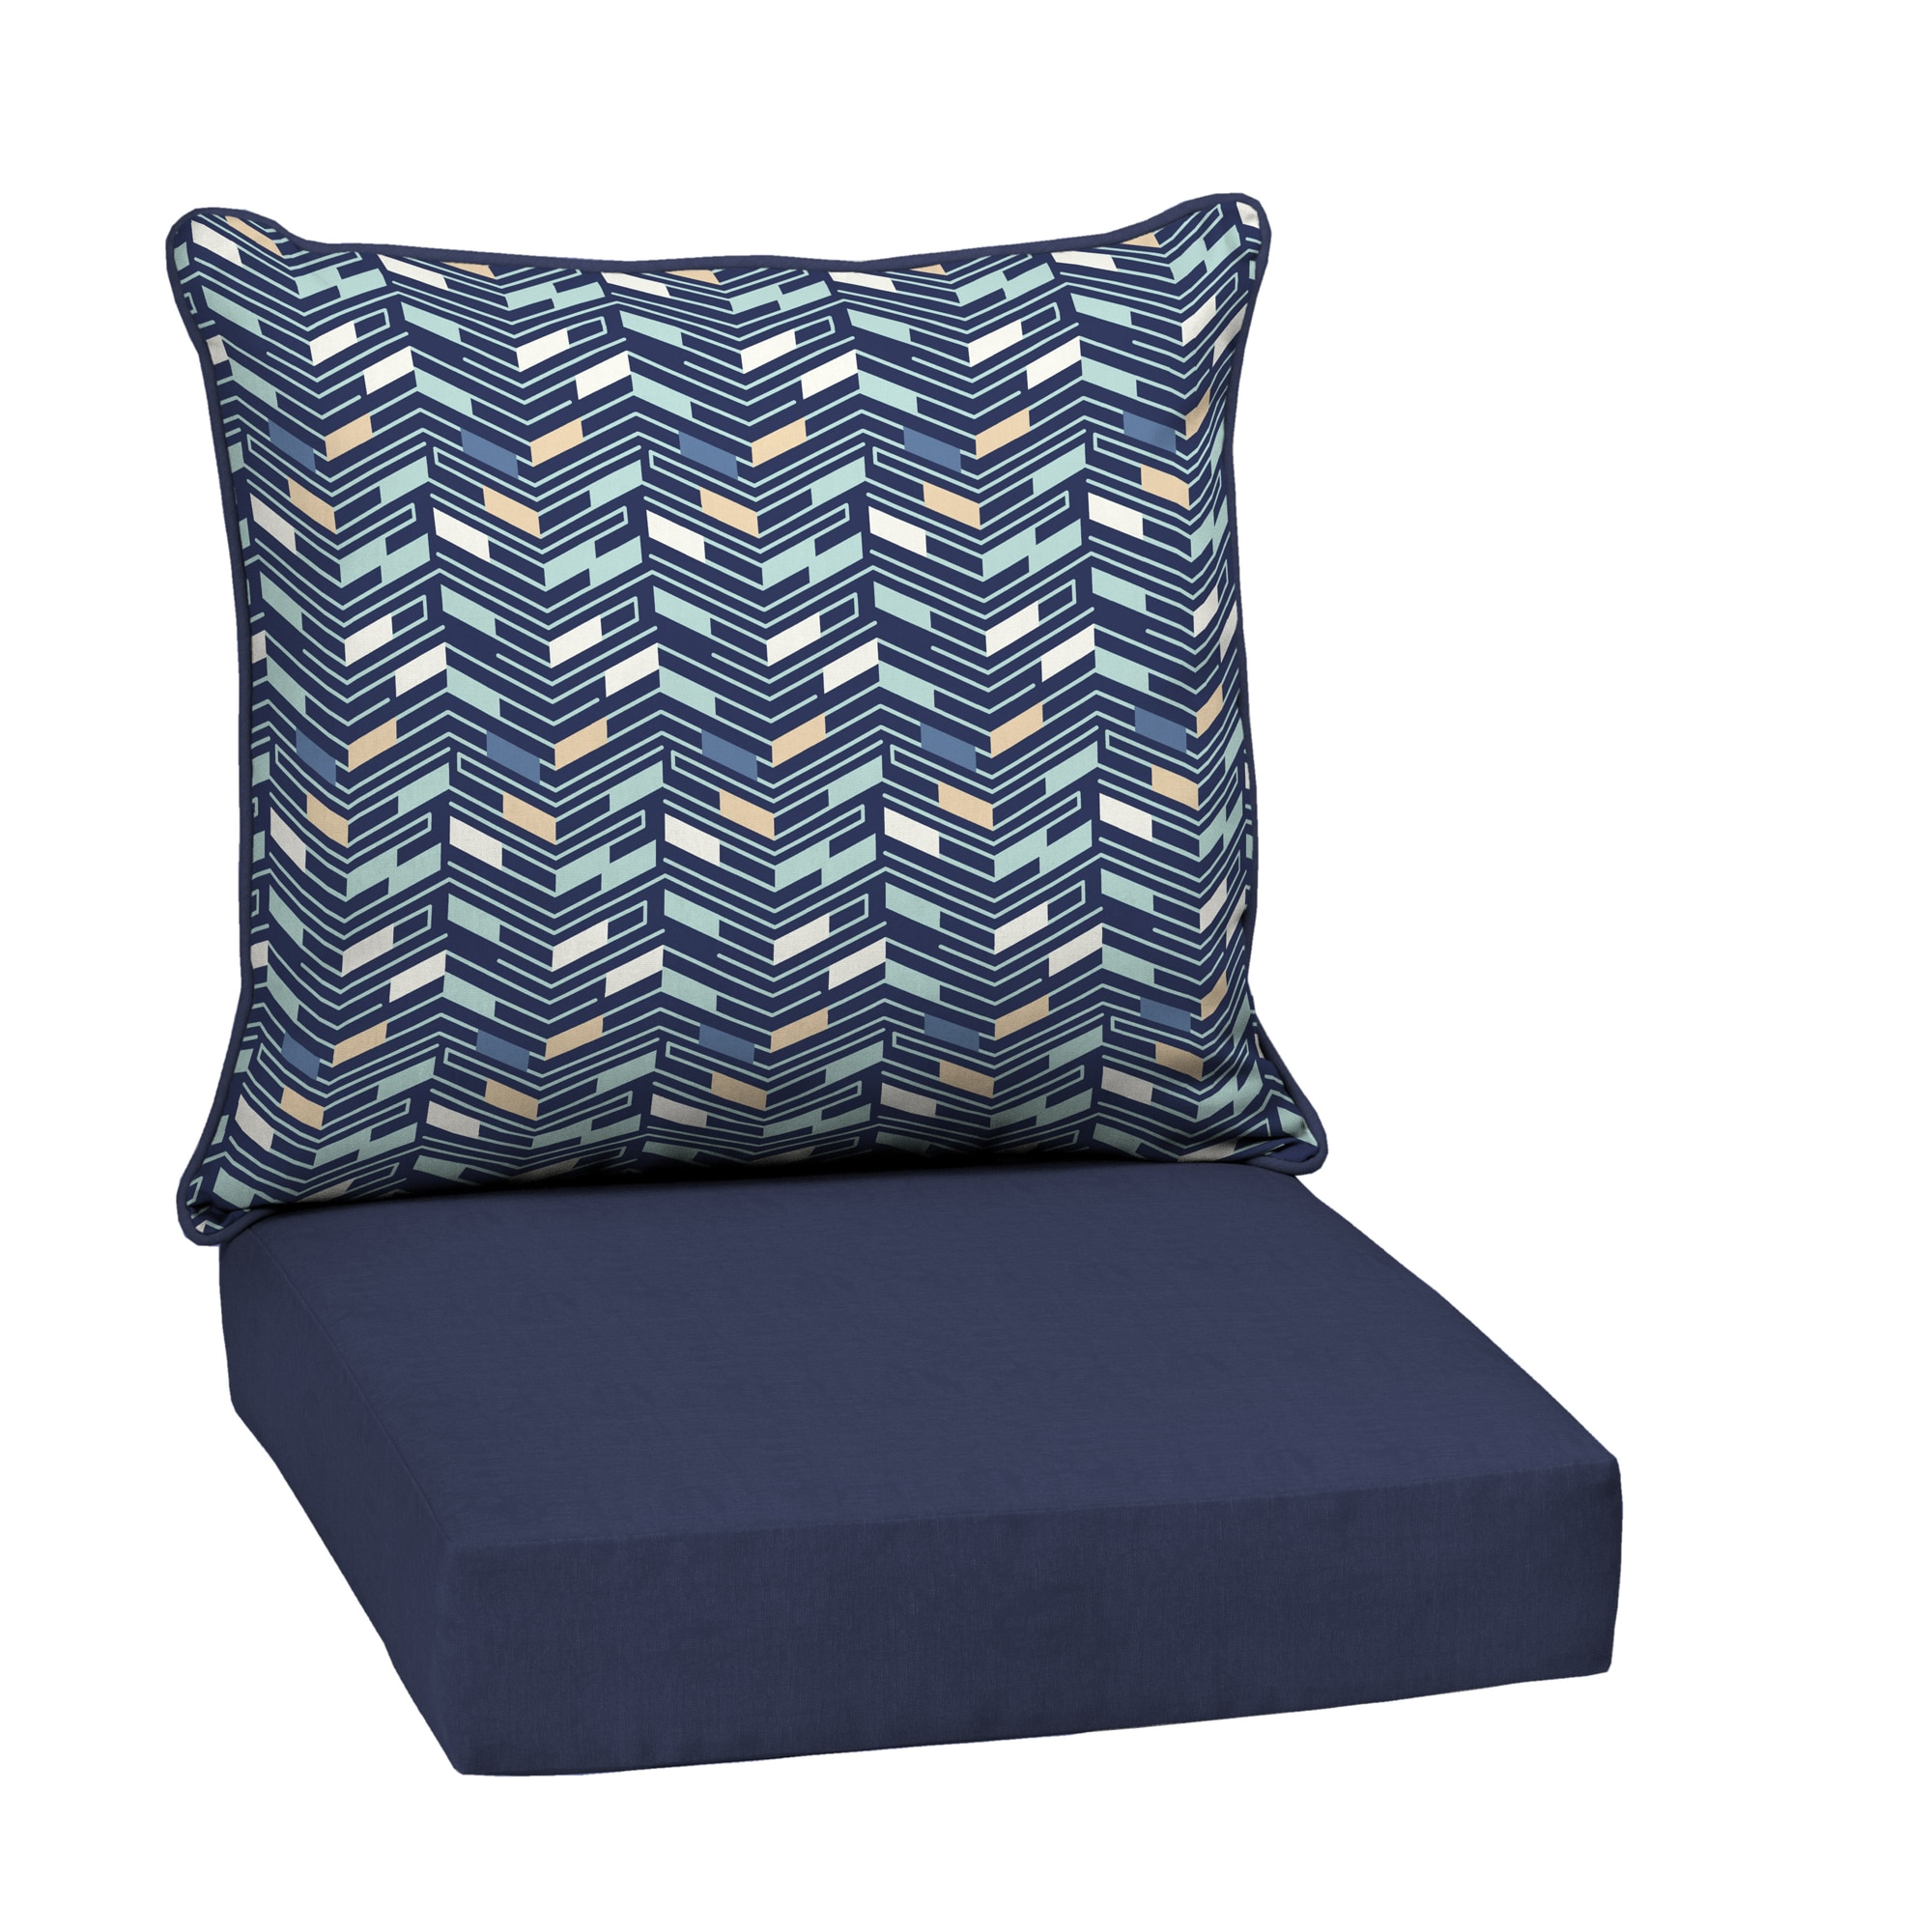 Blazing Needles 960X19-REO-64 60 x 19 in. Patterned Outdoor Spun Polyester Bench Cushion Telfair Peacock